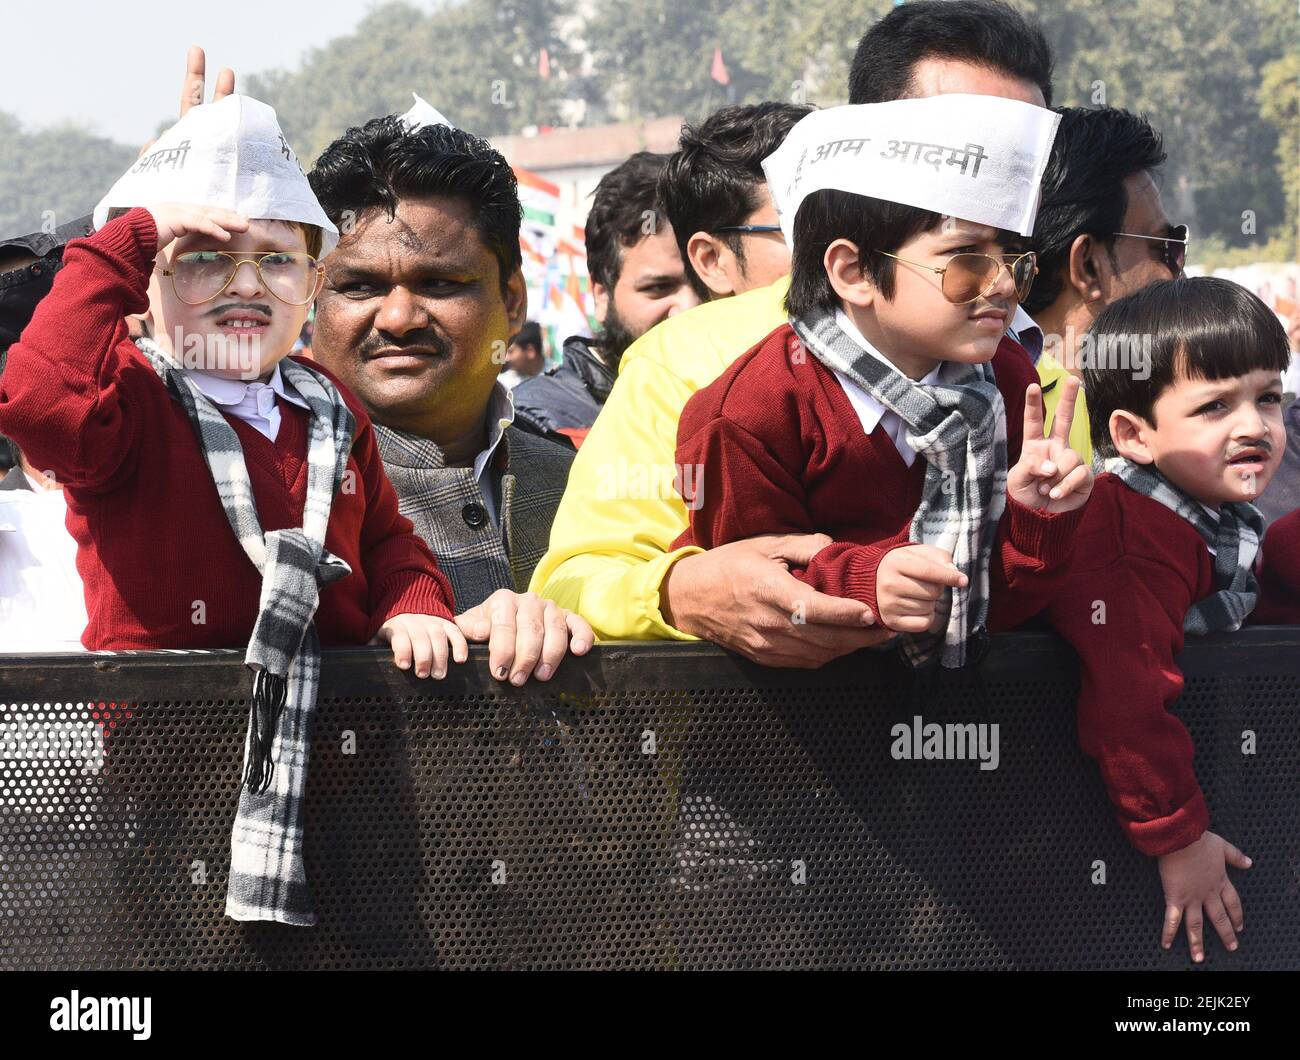 NEW DELHI, INDIA – FEBRUARY 16: Children dressed up as Aam Aadmi Party (AAP)  chief Arvind Kejriwal during the oath ceremony of Delhi, at Ramlila Maidan,  on February 16, 2020 in New